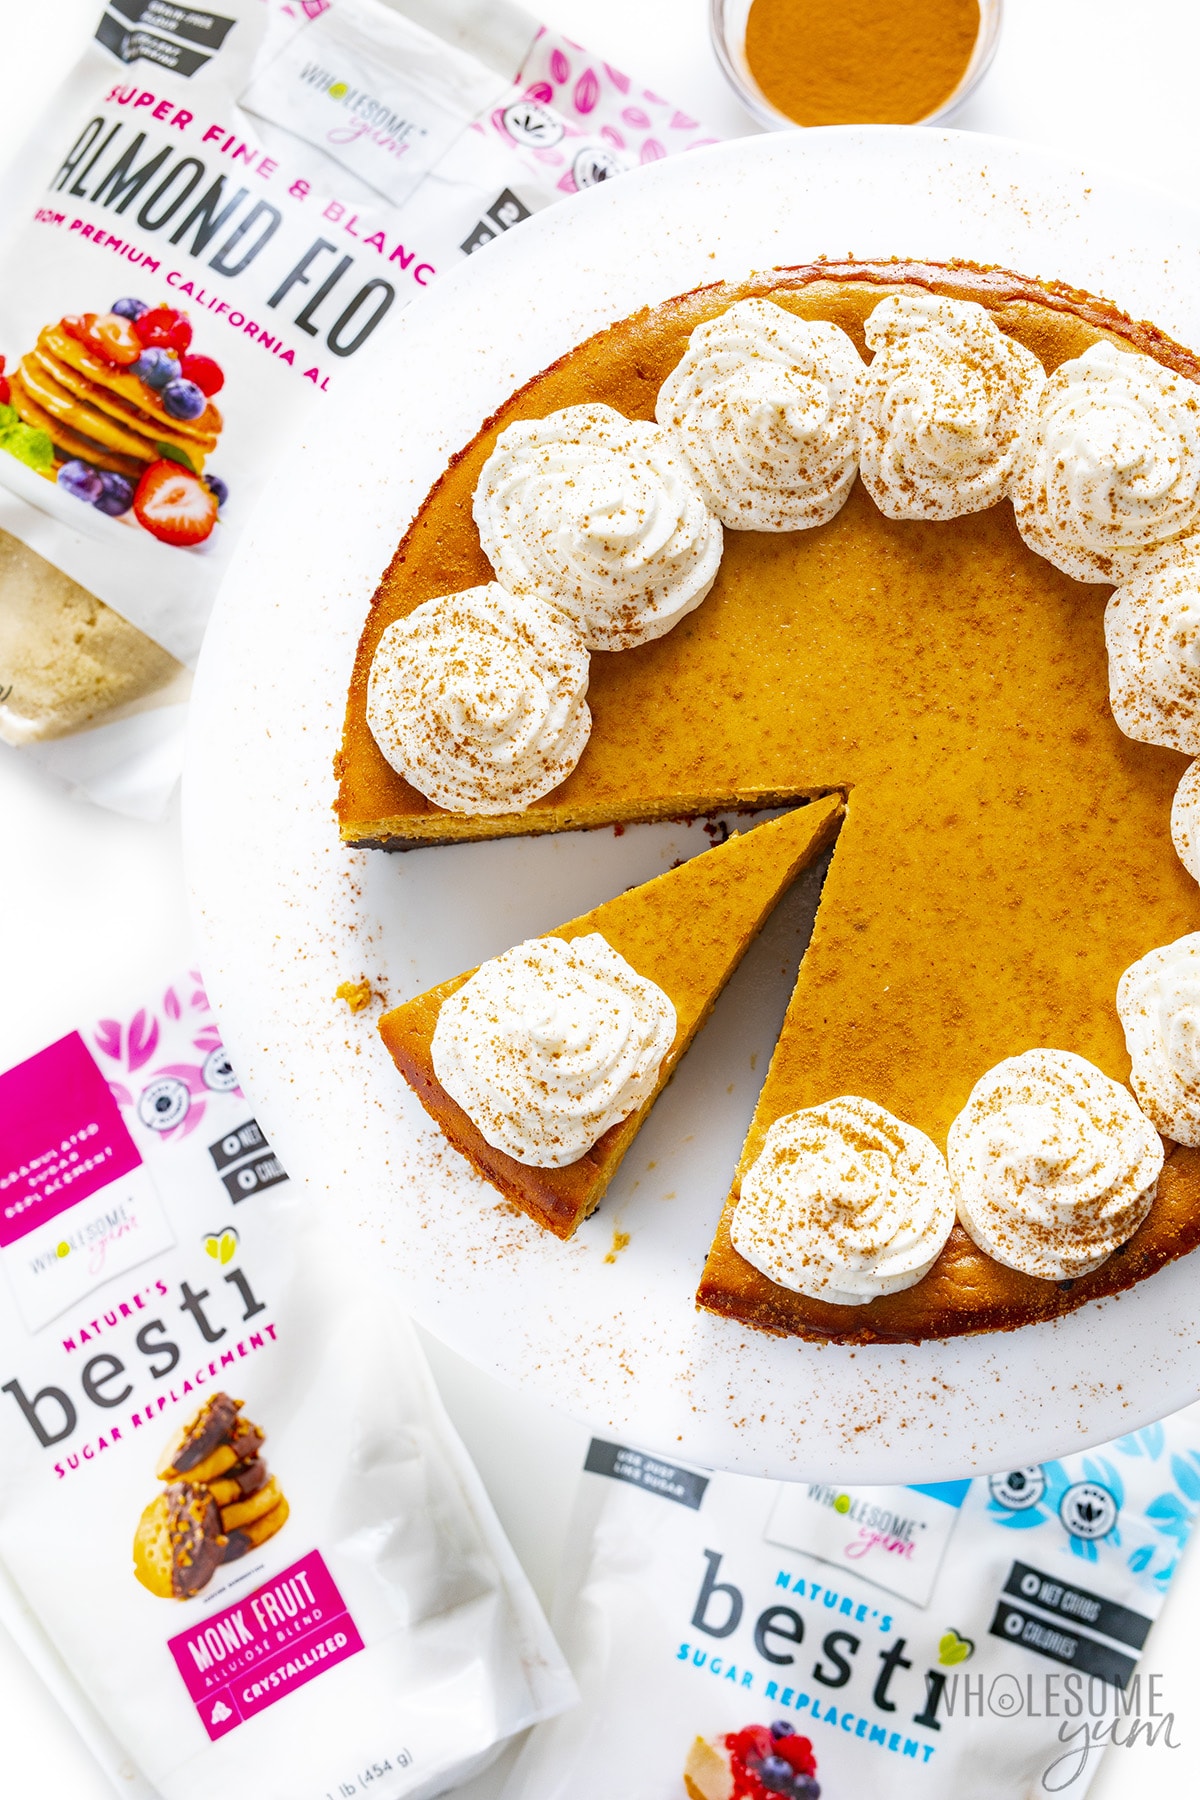 Next to the Keto Pumpkin Cheesecake is a bag of Besti and Wholesome Yum almond flour.